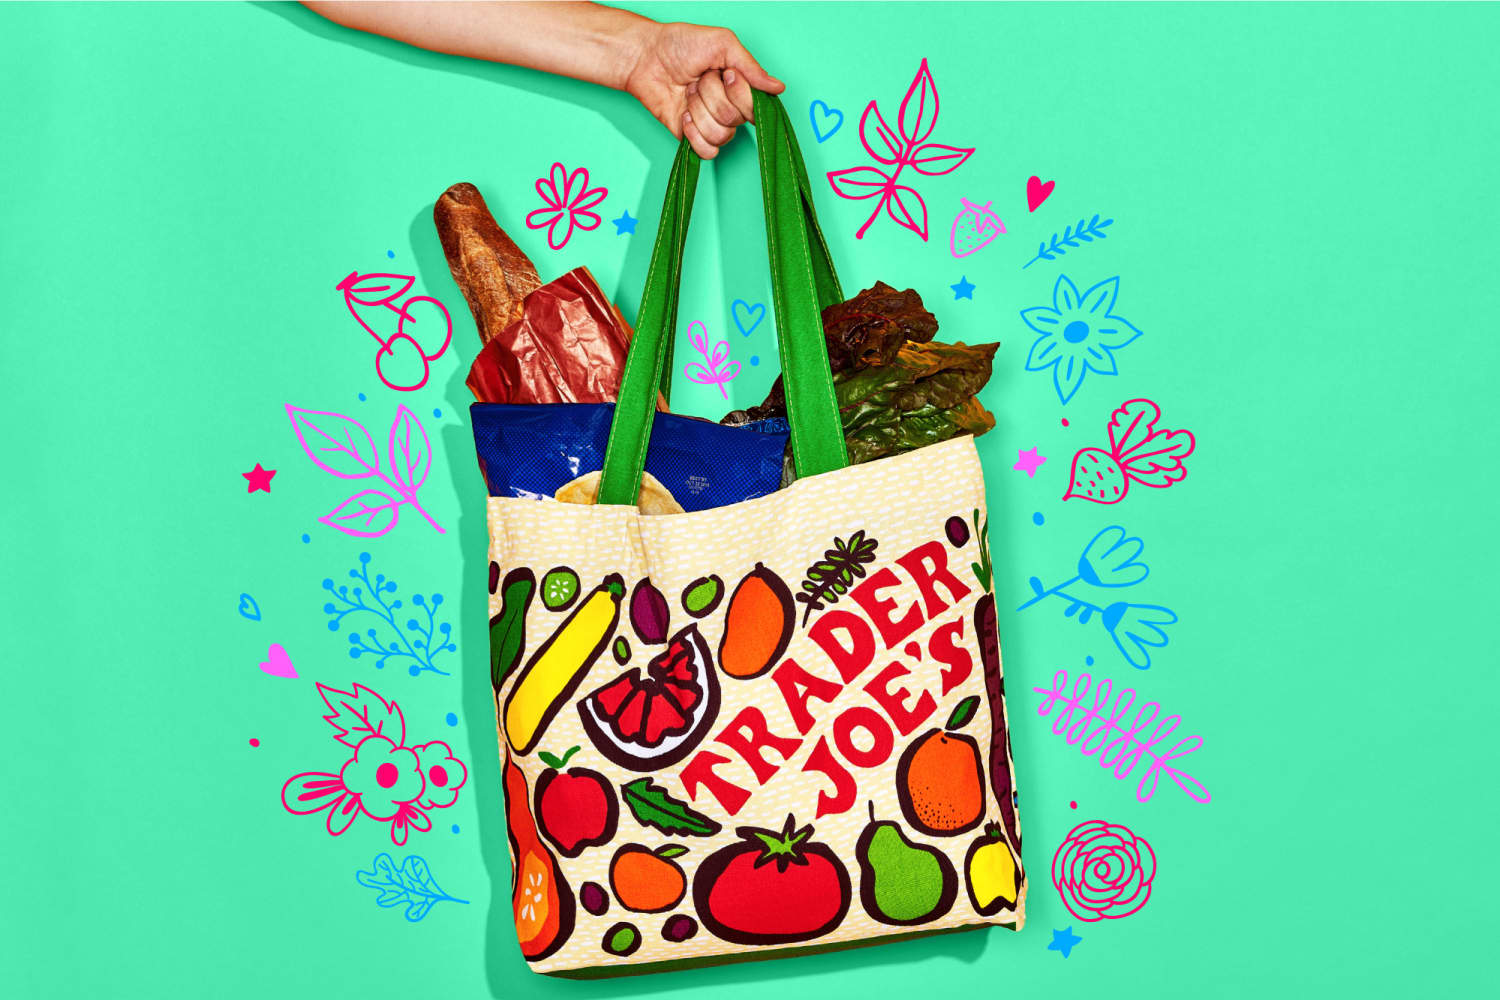 Trader Joes Coupons Ways to Save Money The Kitchn